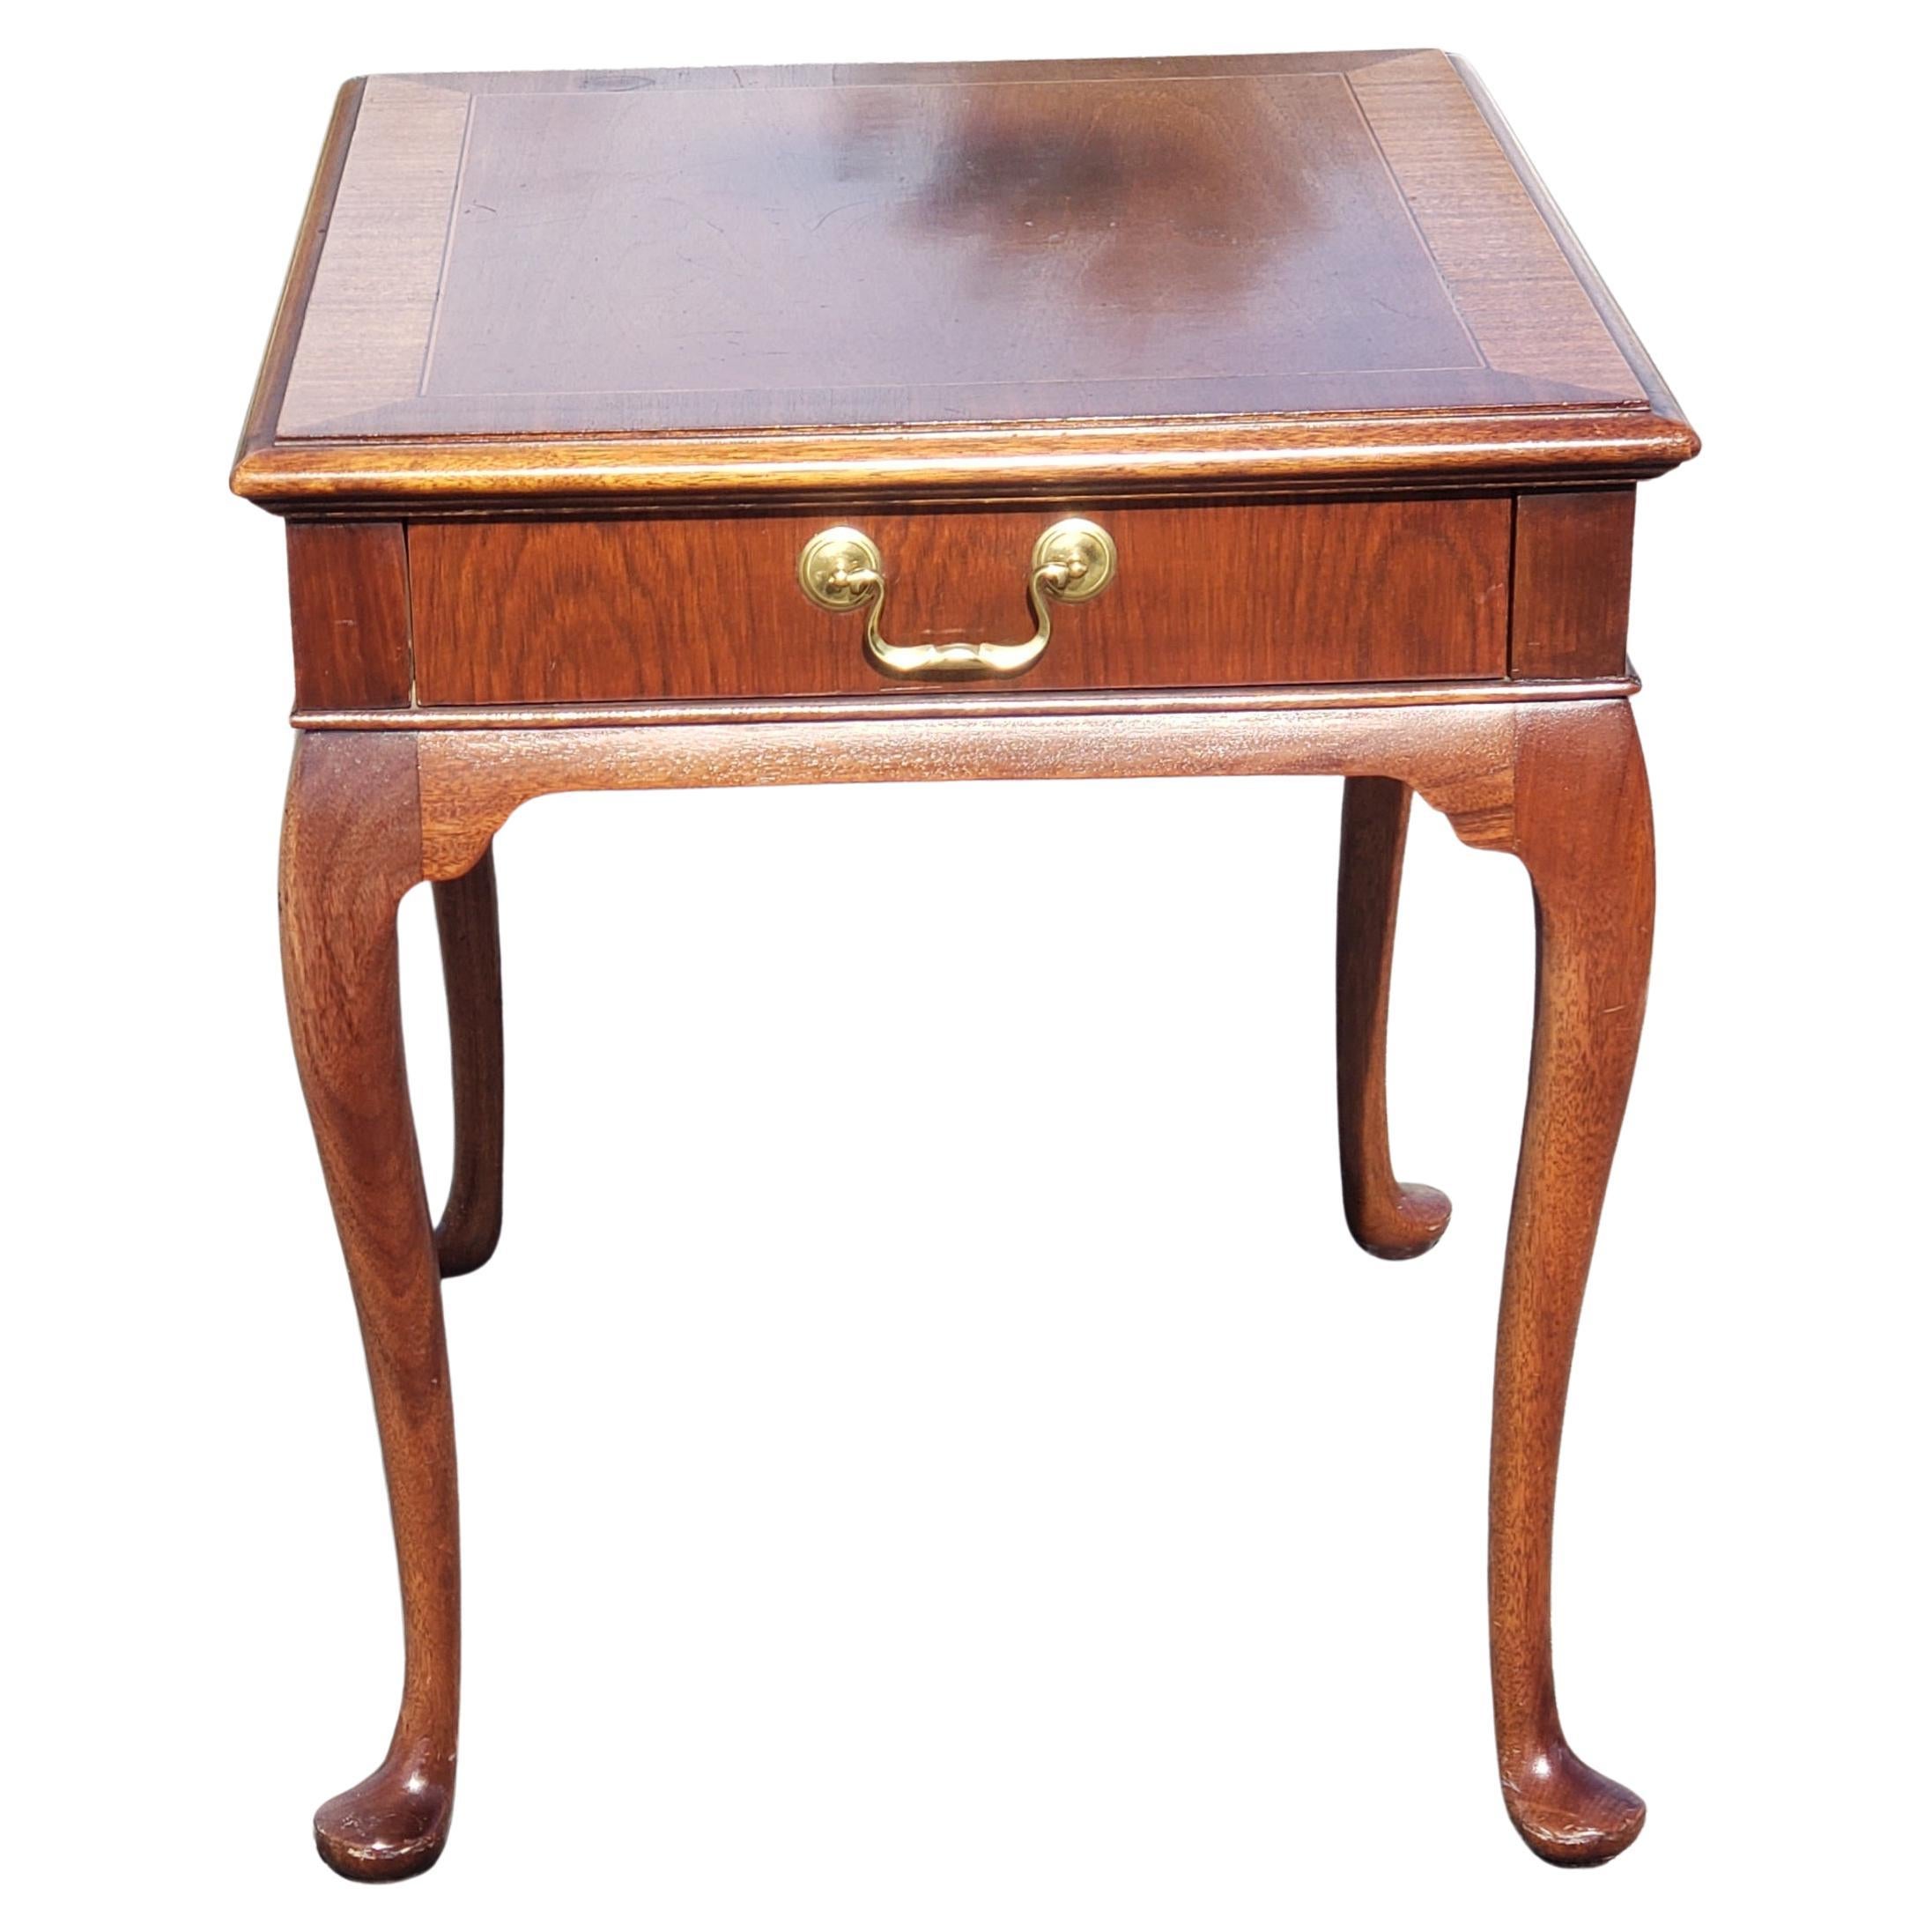 Hickory Chair Chippendale Mahogany Banded Top Side Table with Queen Ann Legs